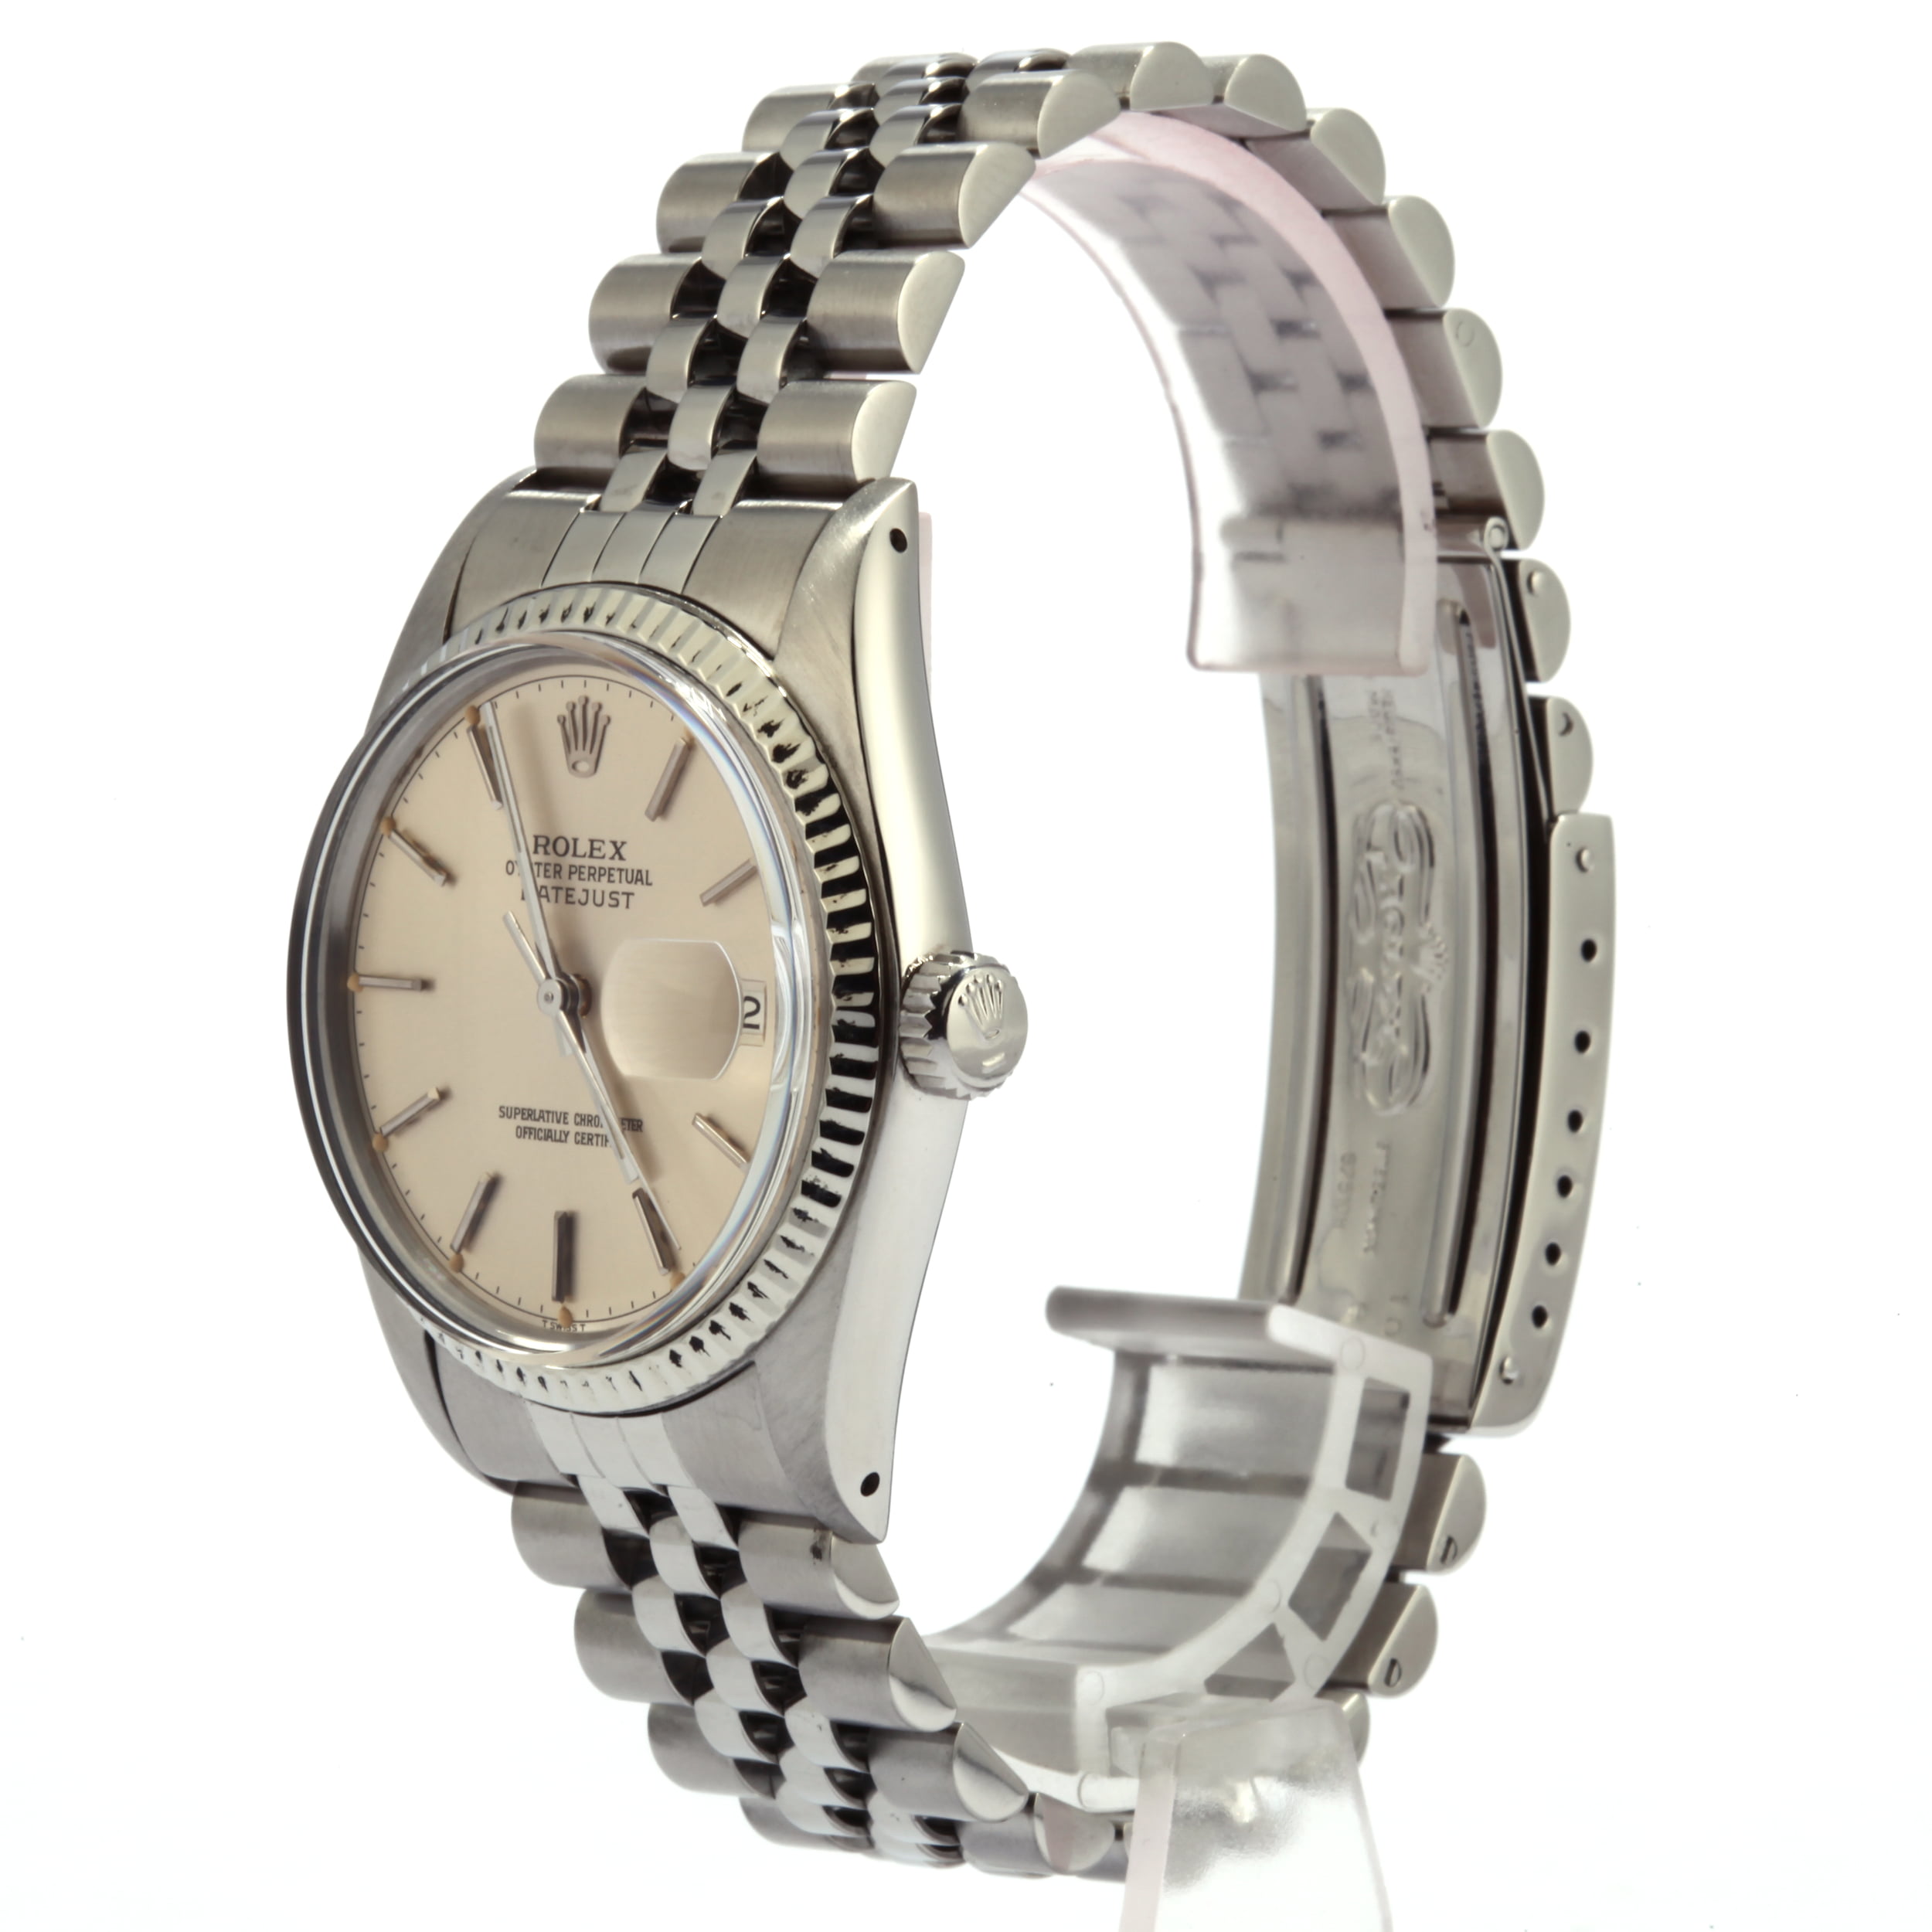 Rolex Oyster Perpetual DateJust 16014 Stainless Steel T